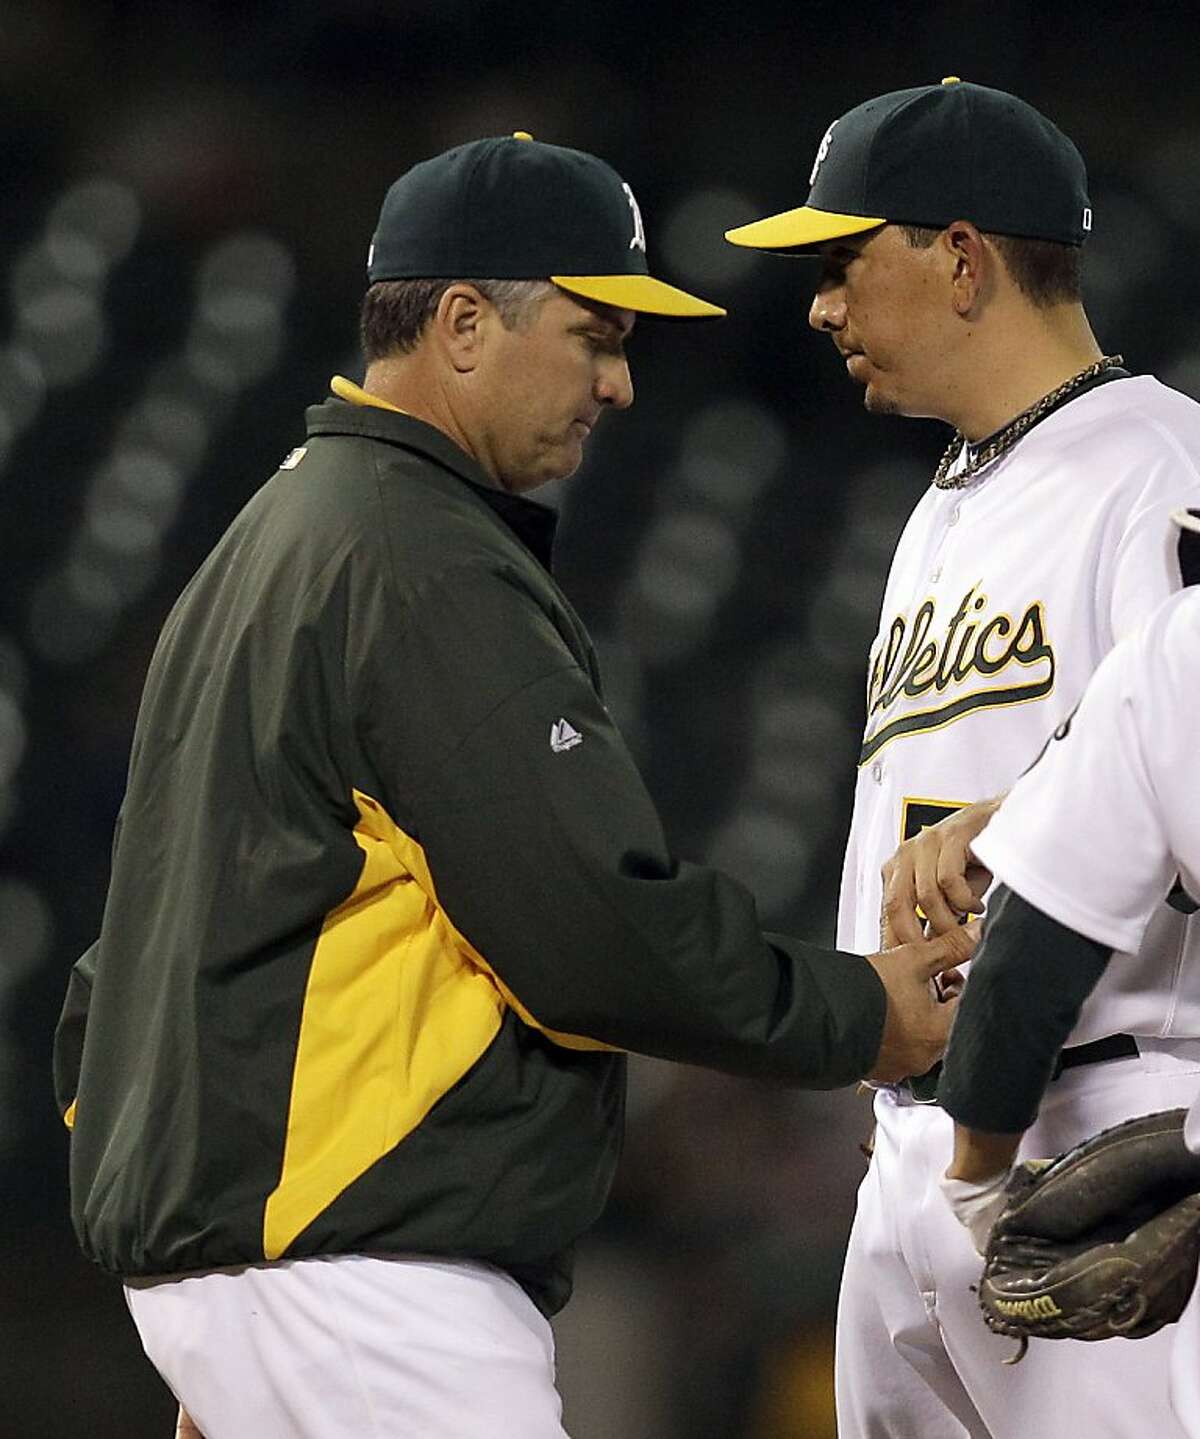 Oakland Athletics manager Bob Geren, left, takes the ball from pitcher Brian Fuentes during the ninth inning of a baseball game Tuesday, May 3, 2011, in Oakland, Calif.